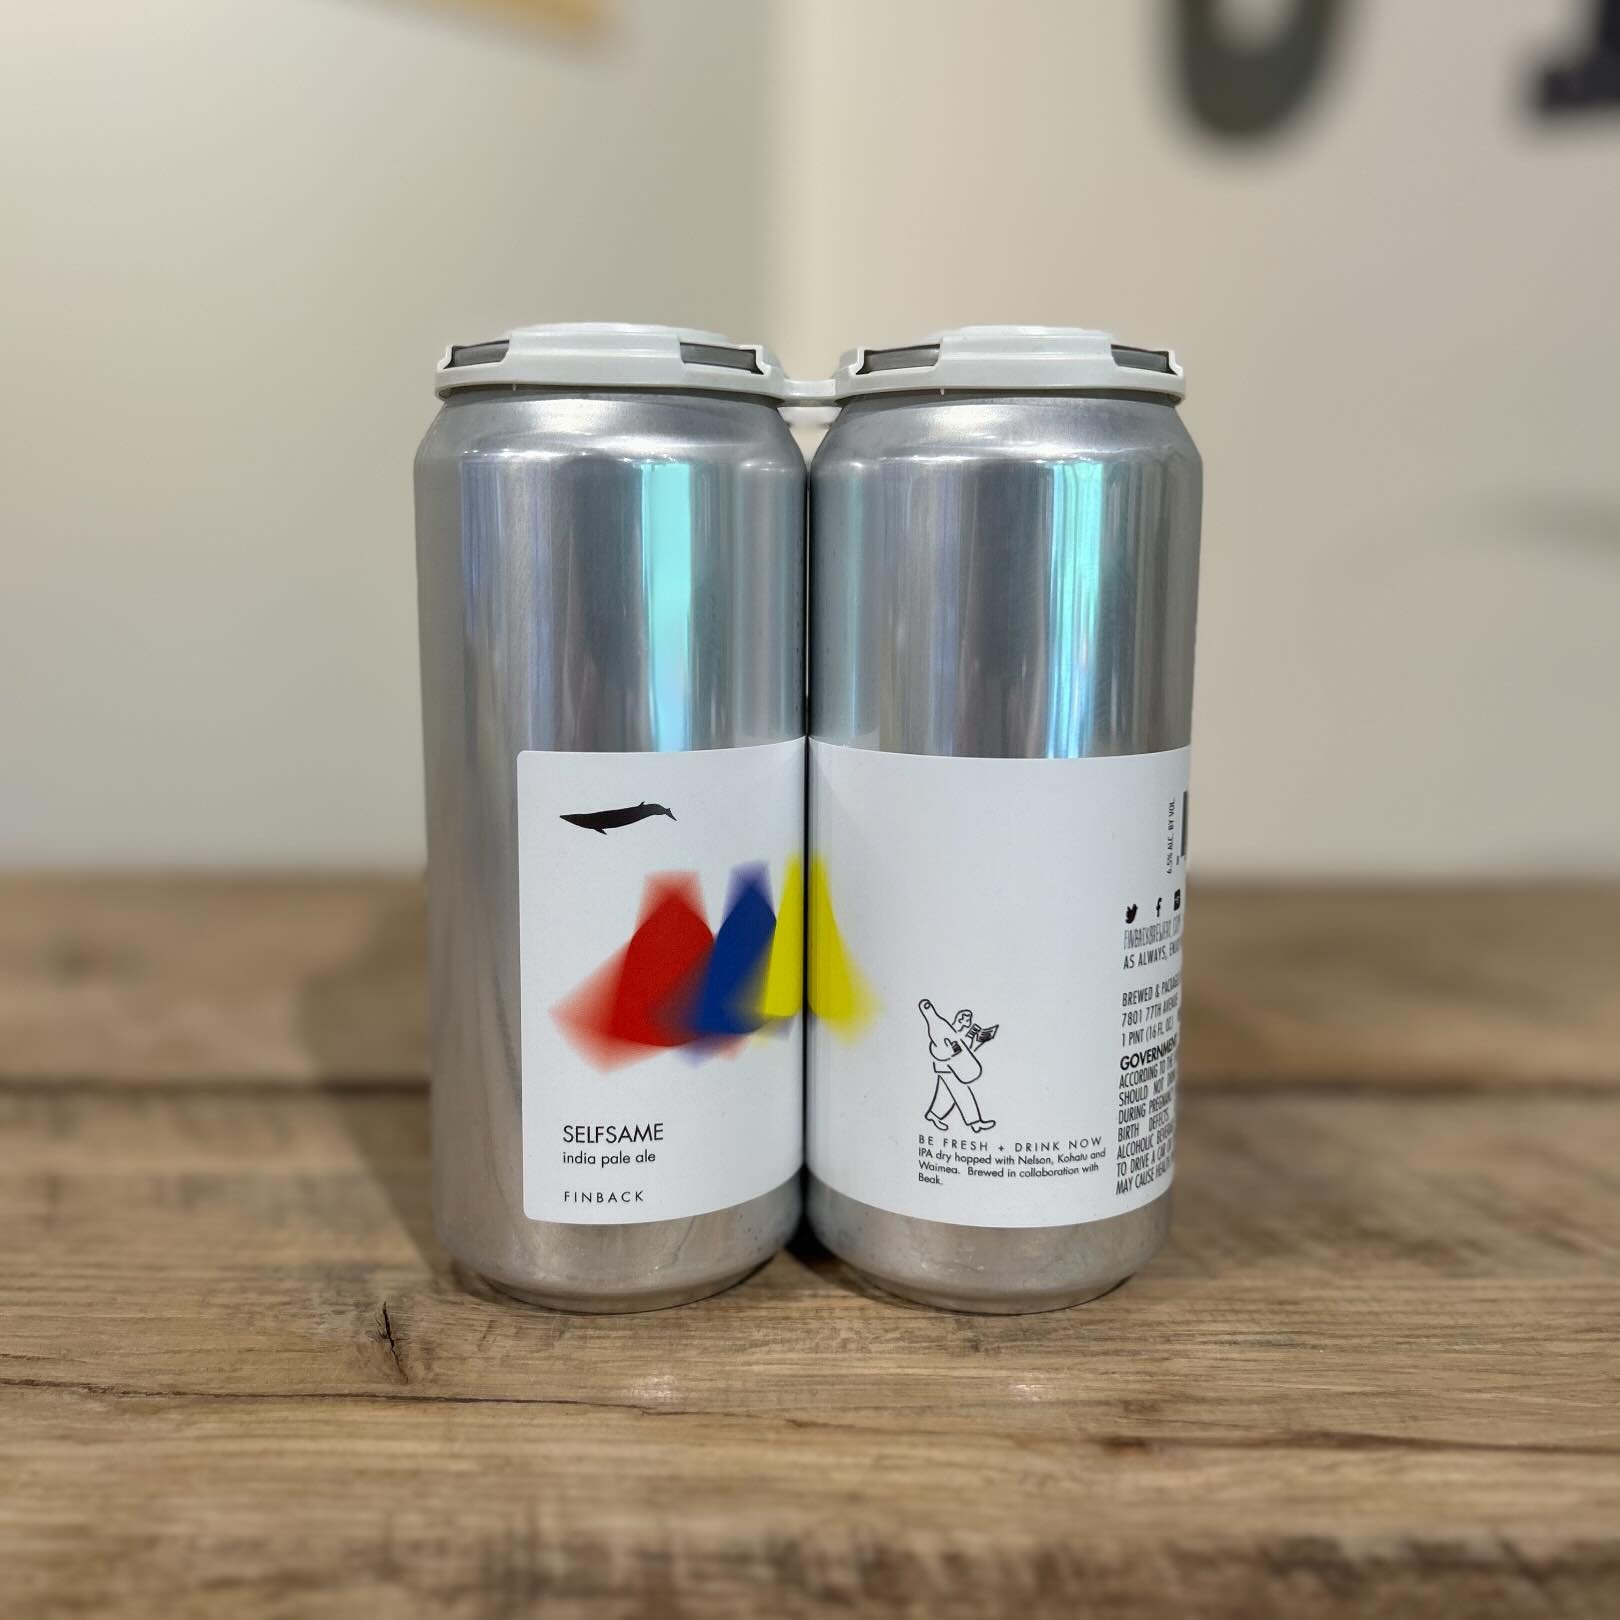 Fresh @finbackbrewery #NowAvailable #SudburyCraftBeer #FollowTheWhale
&mdash;
Our collaboration with @thebeakbrewery is ready for your drinking pleasure.

Selfsame is a soft, easy-drinking IPA with a dry hop of Nelson, Kohatu, and Waimea hops. This t